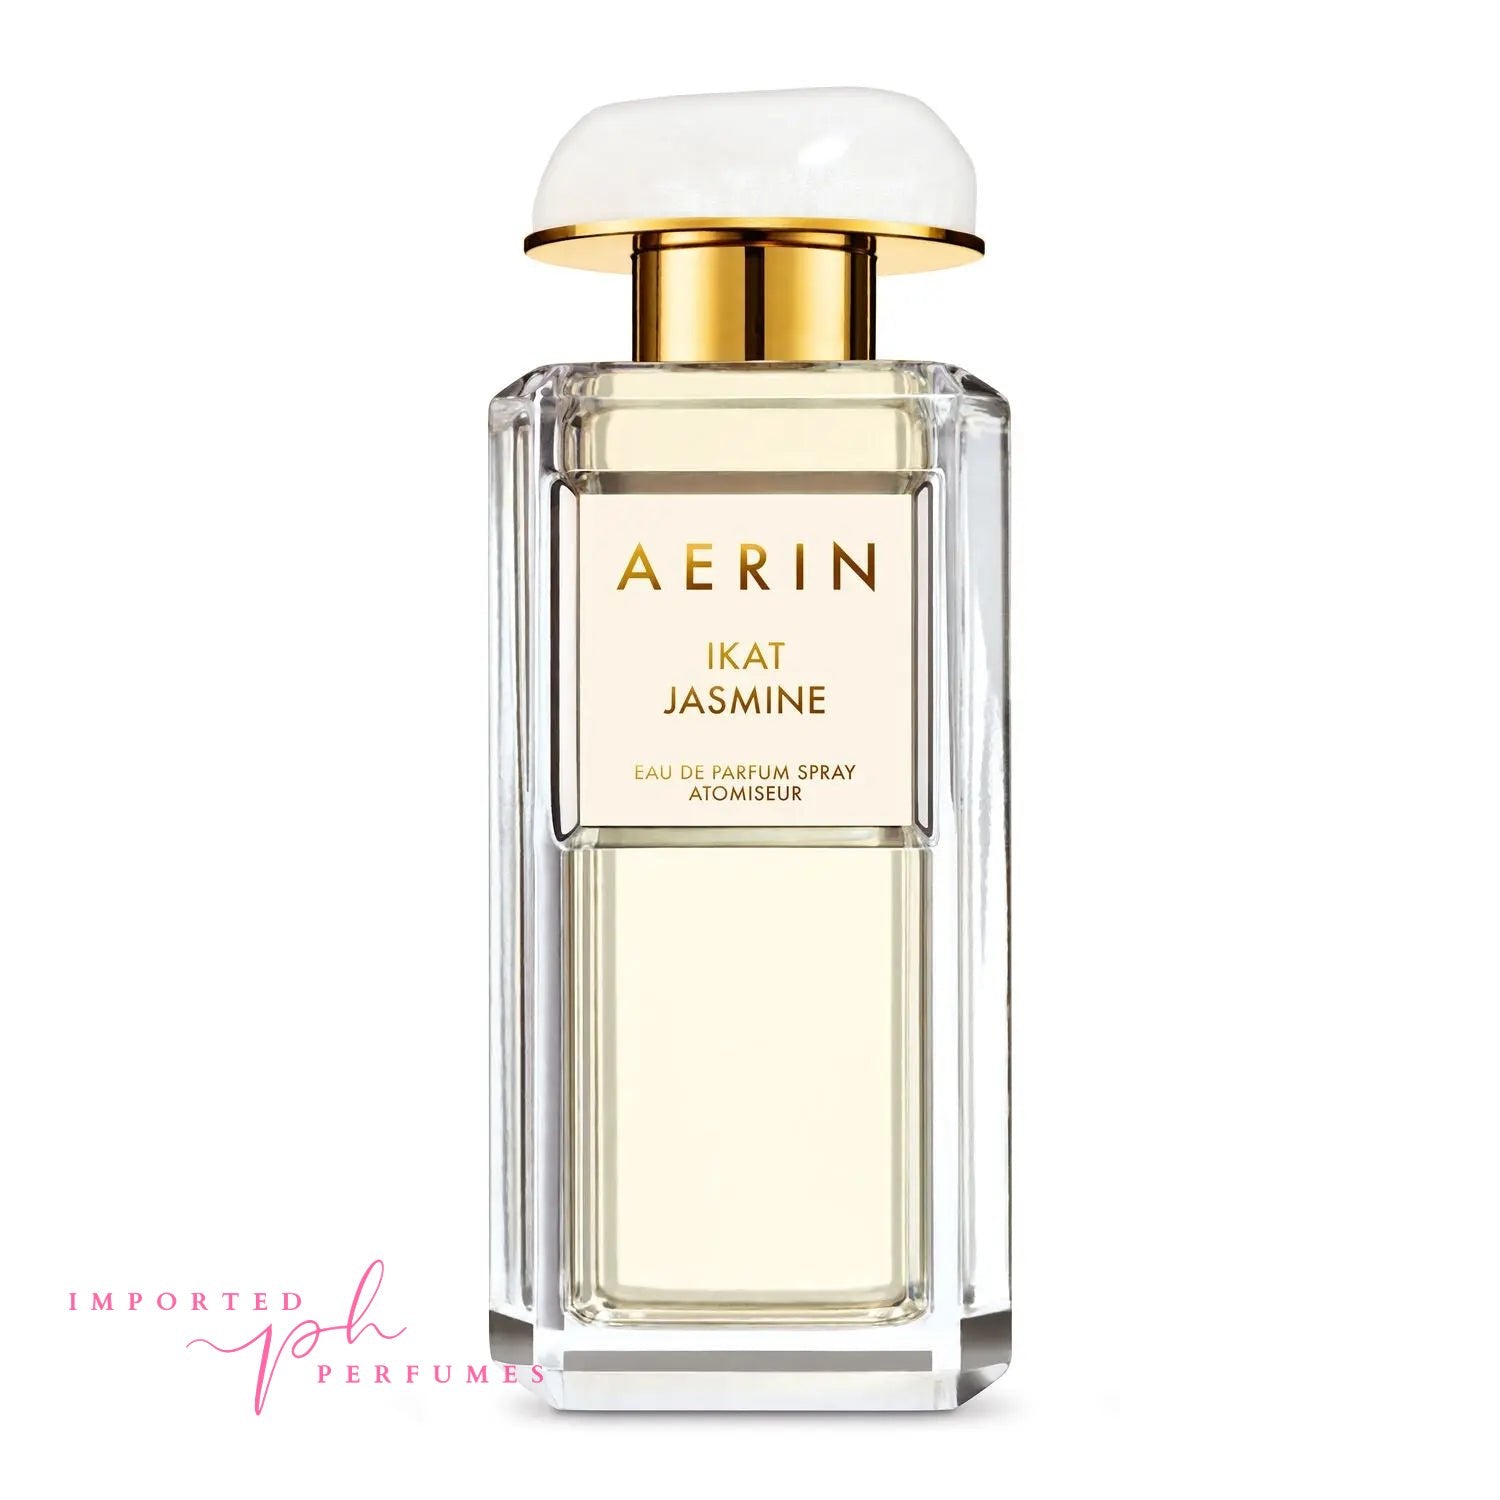 Ikat Jasmine By Aerin Lauder EDP For Women 100ml Imported Perfumes & Beauty Store